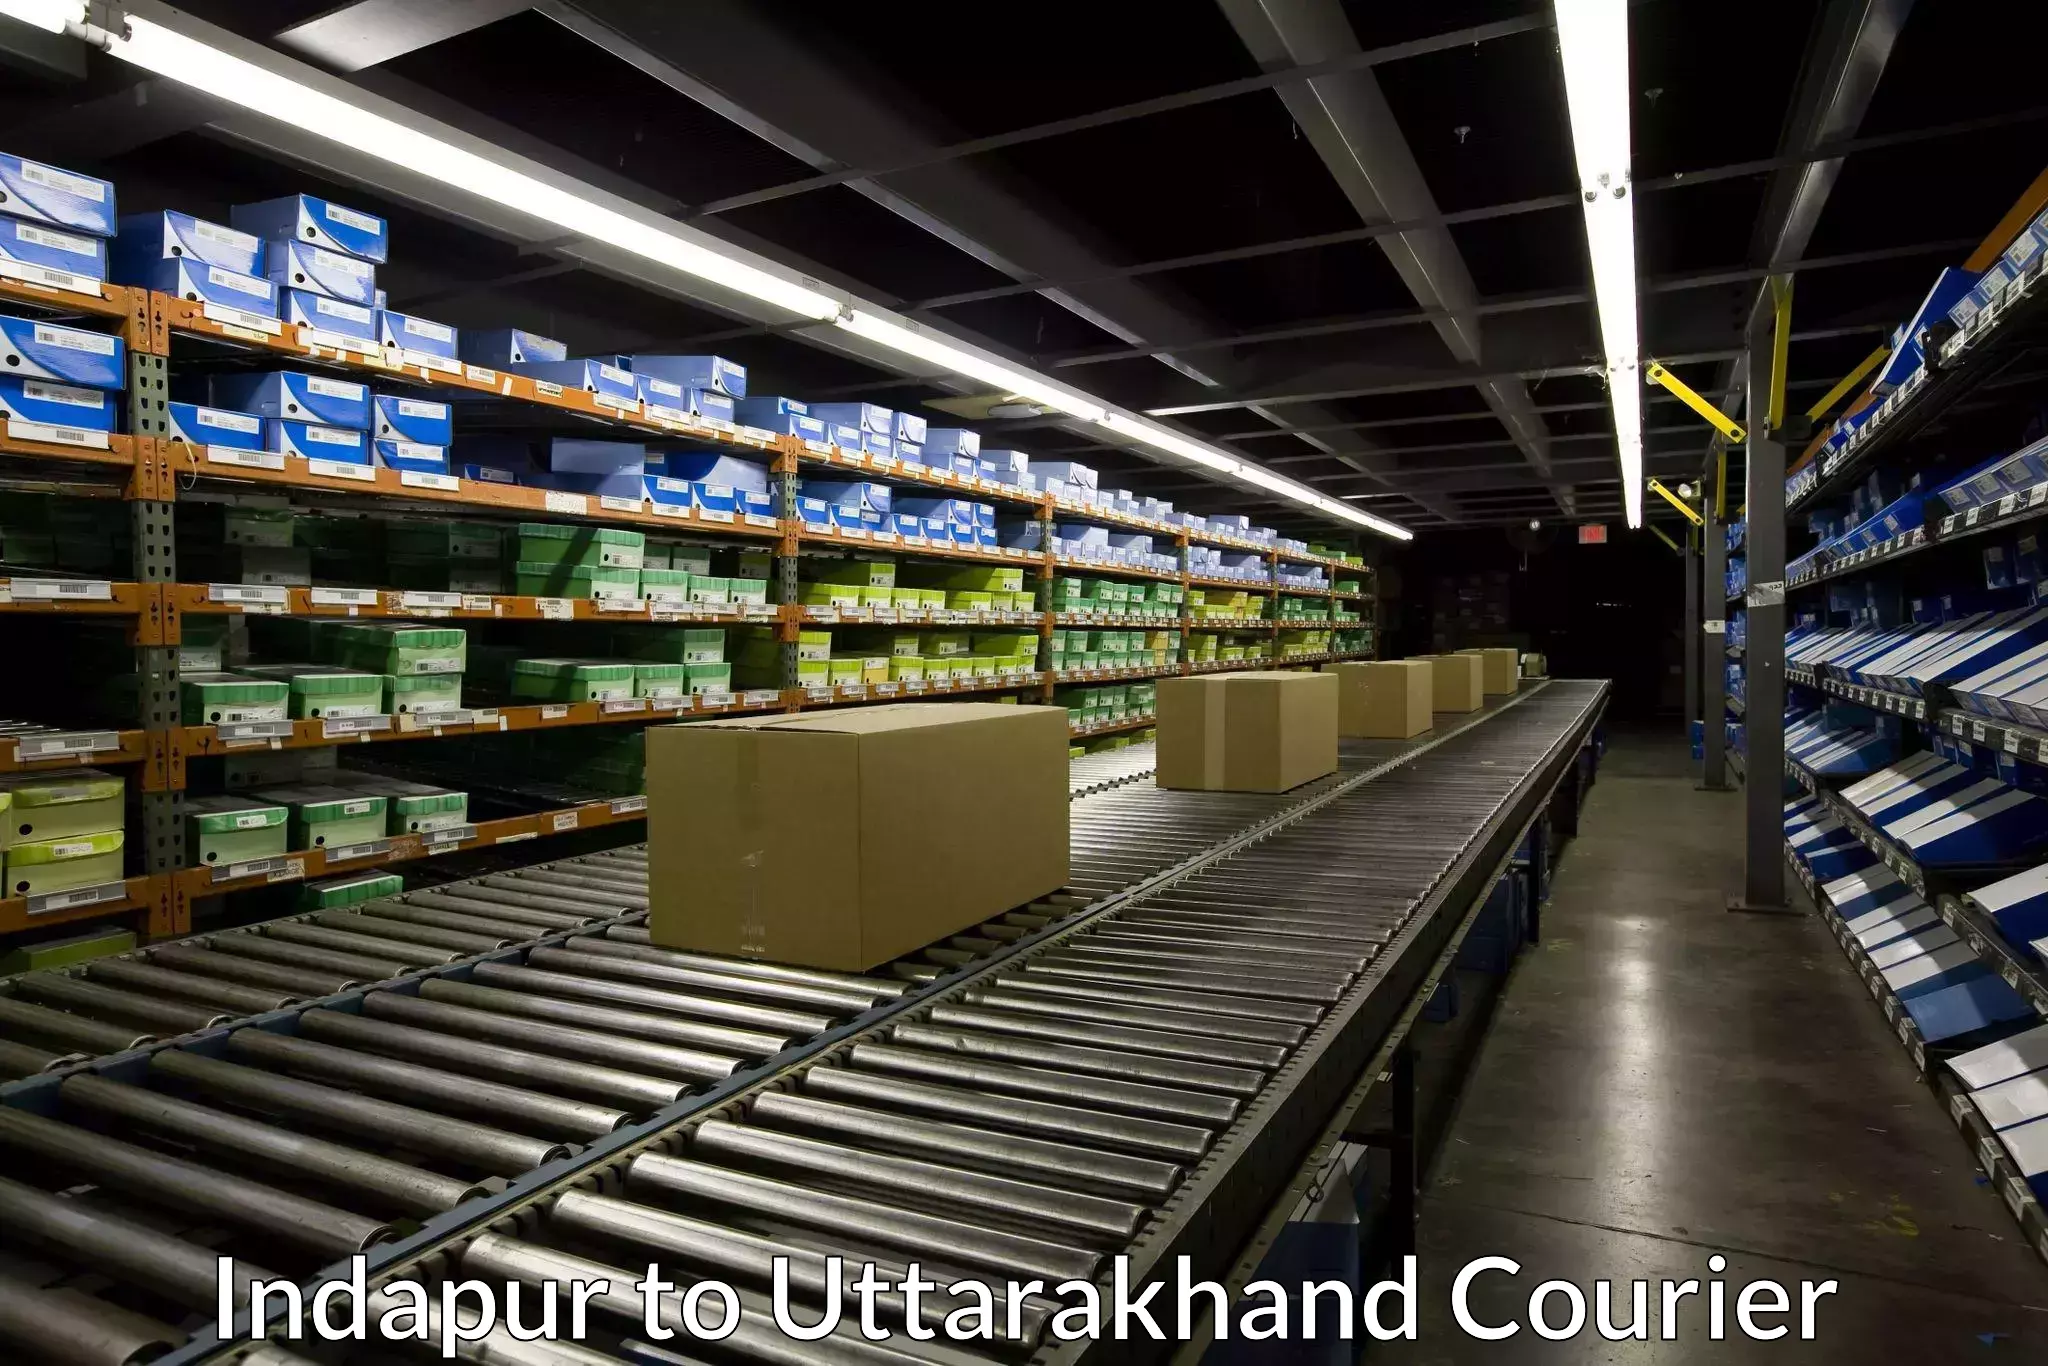 Seamless shipping service in Indapur to Uttarakhand